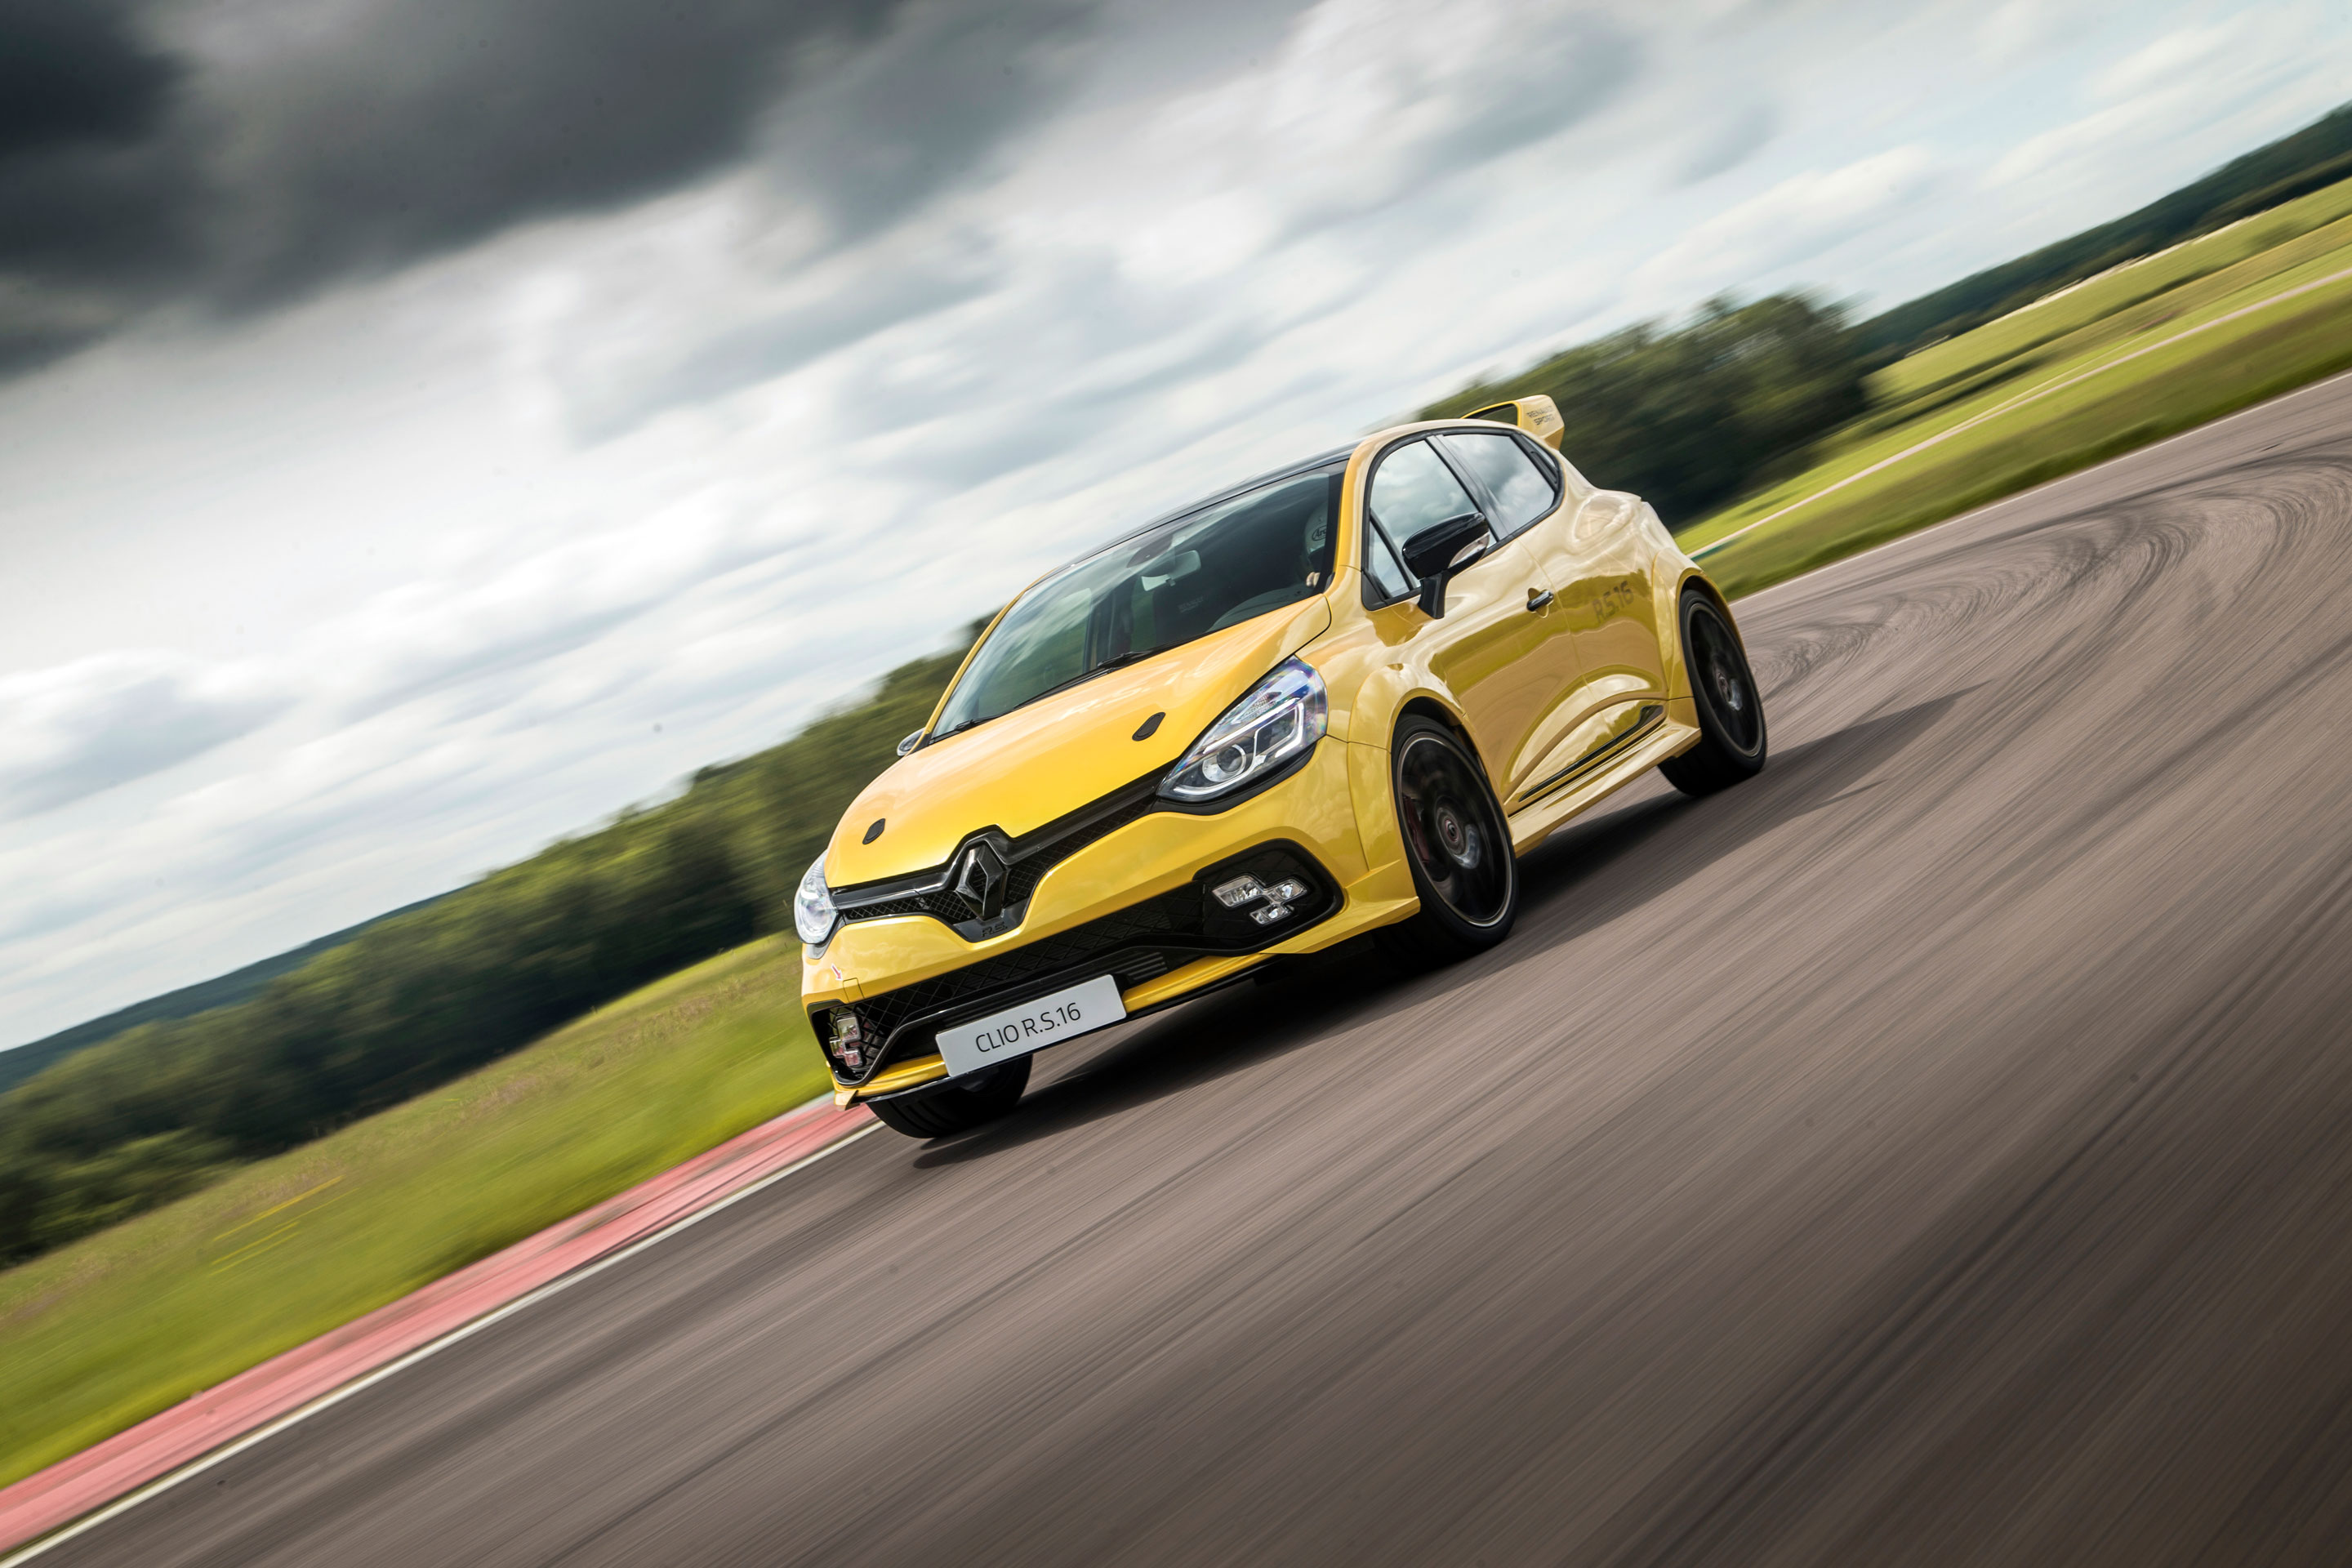 This is the 271bhp Renault Sport Clio RS16